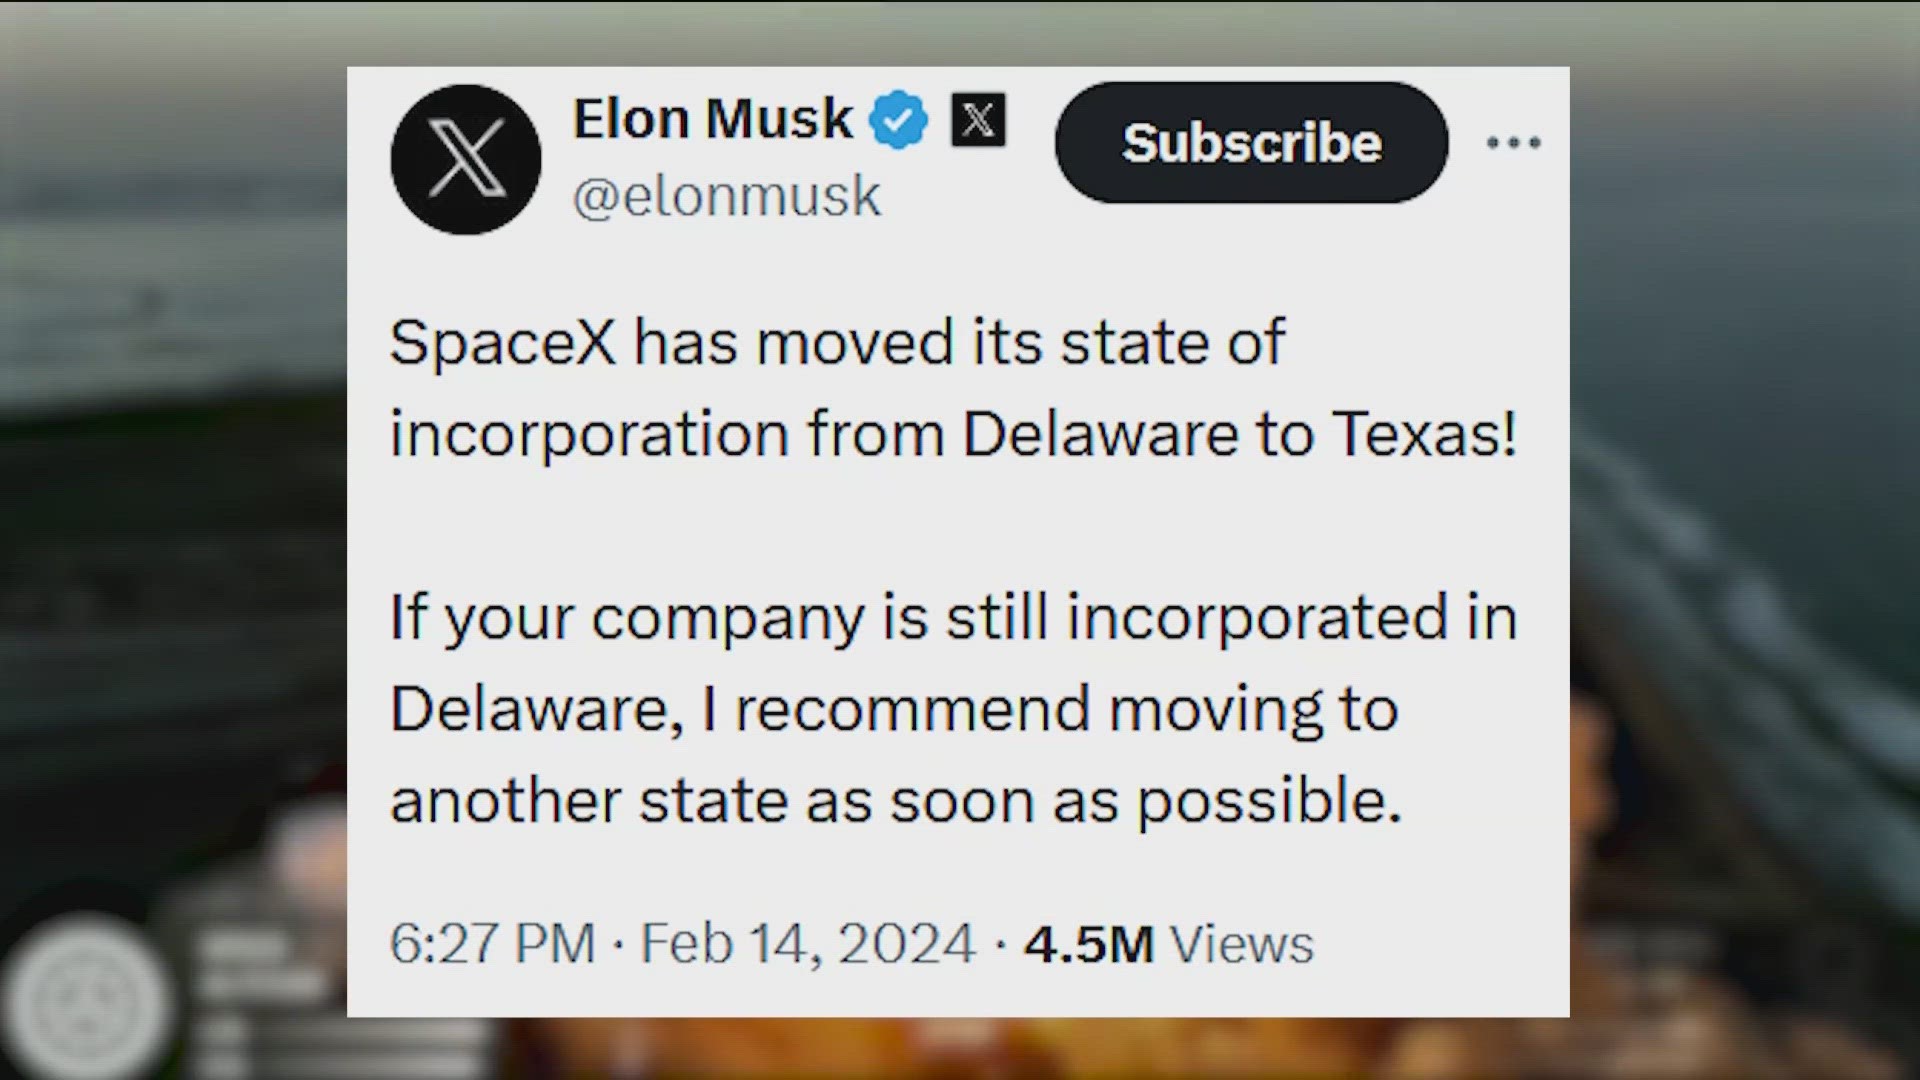 SpaceX has officially moved its incorporation from Delaware to Texas. CEO Elon Musk posted that announcement to social media.